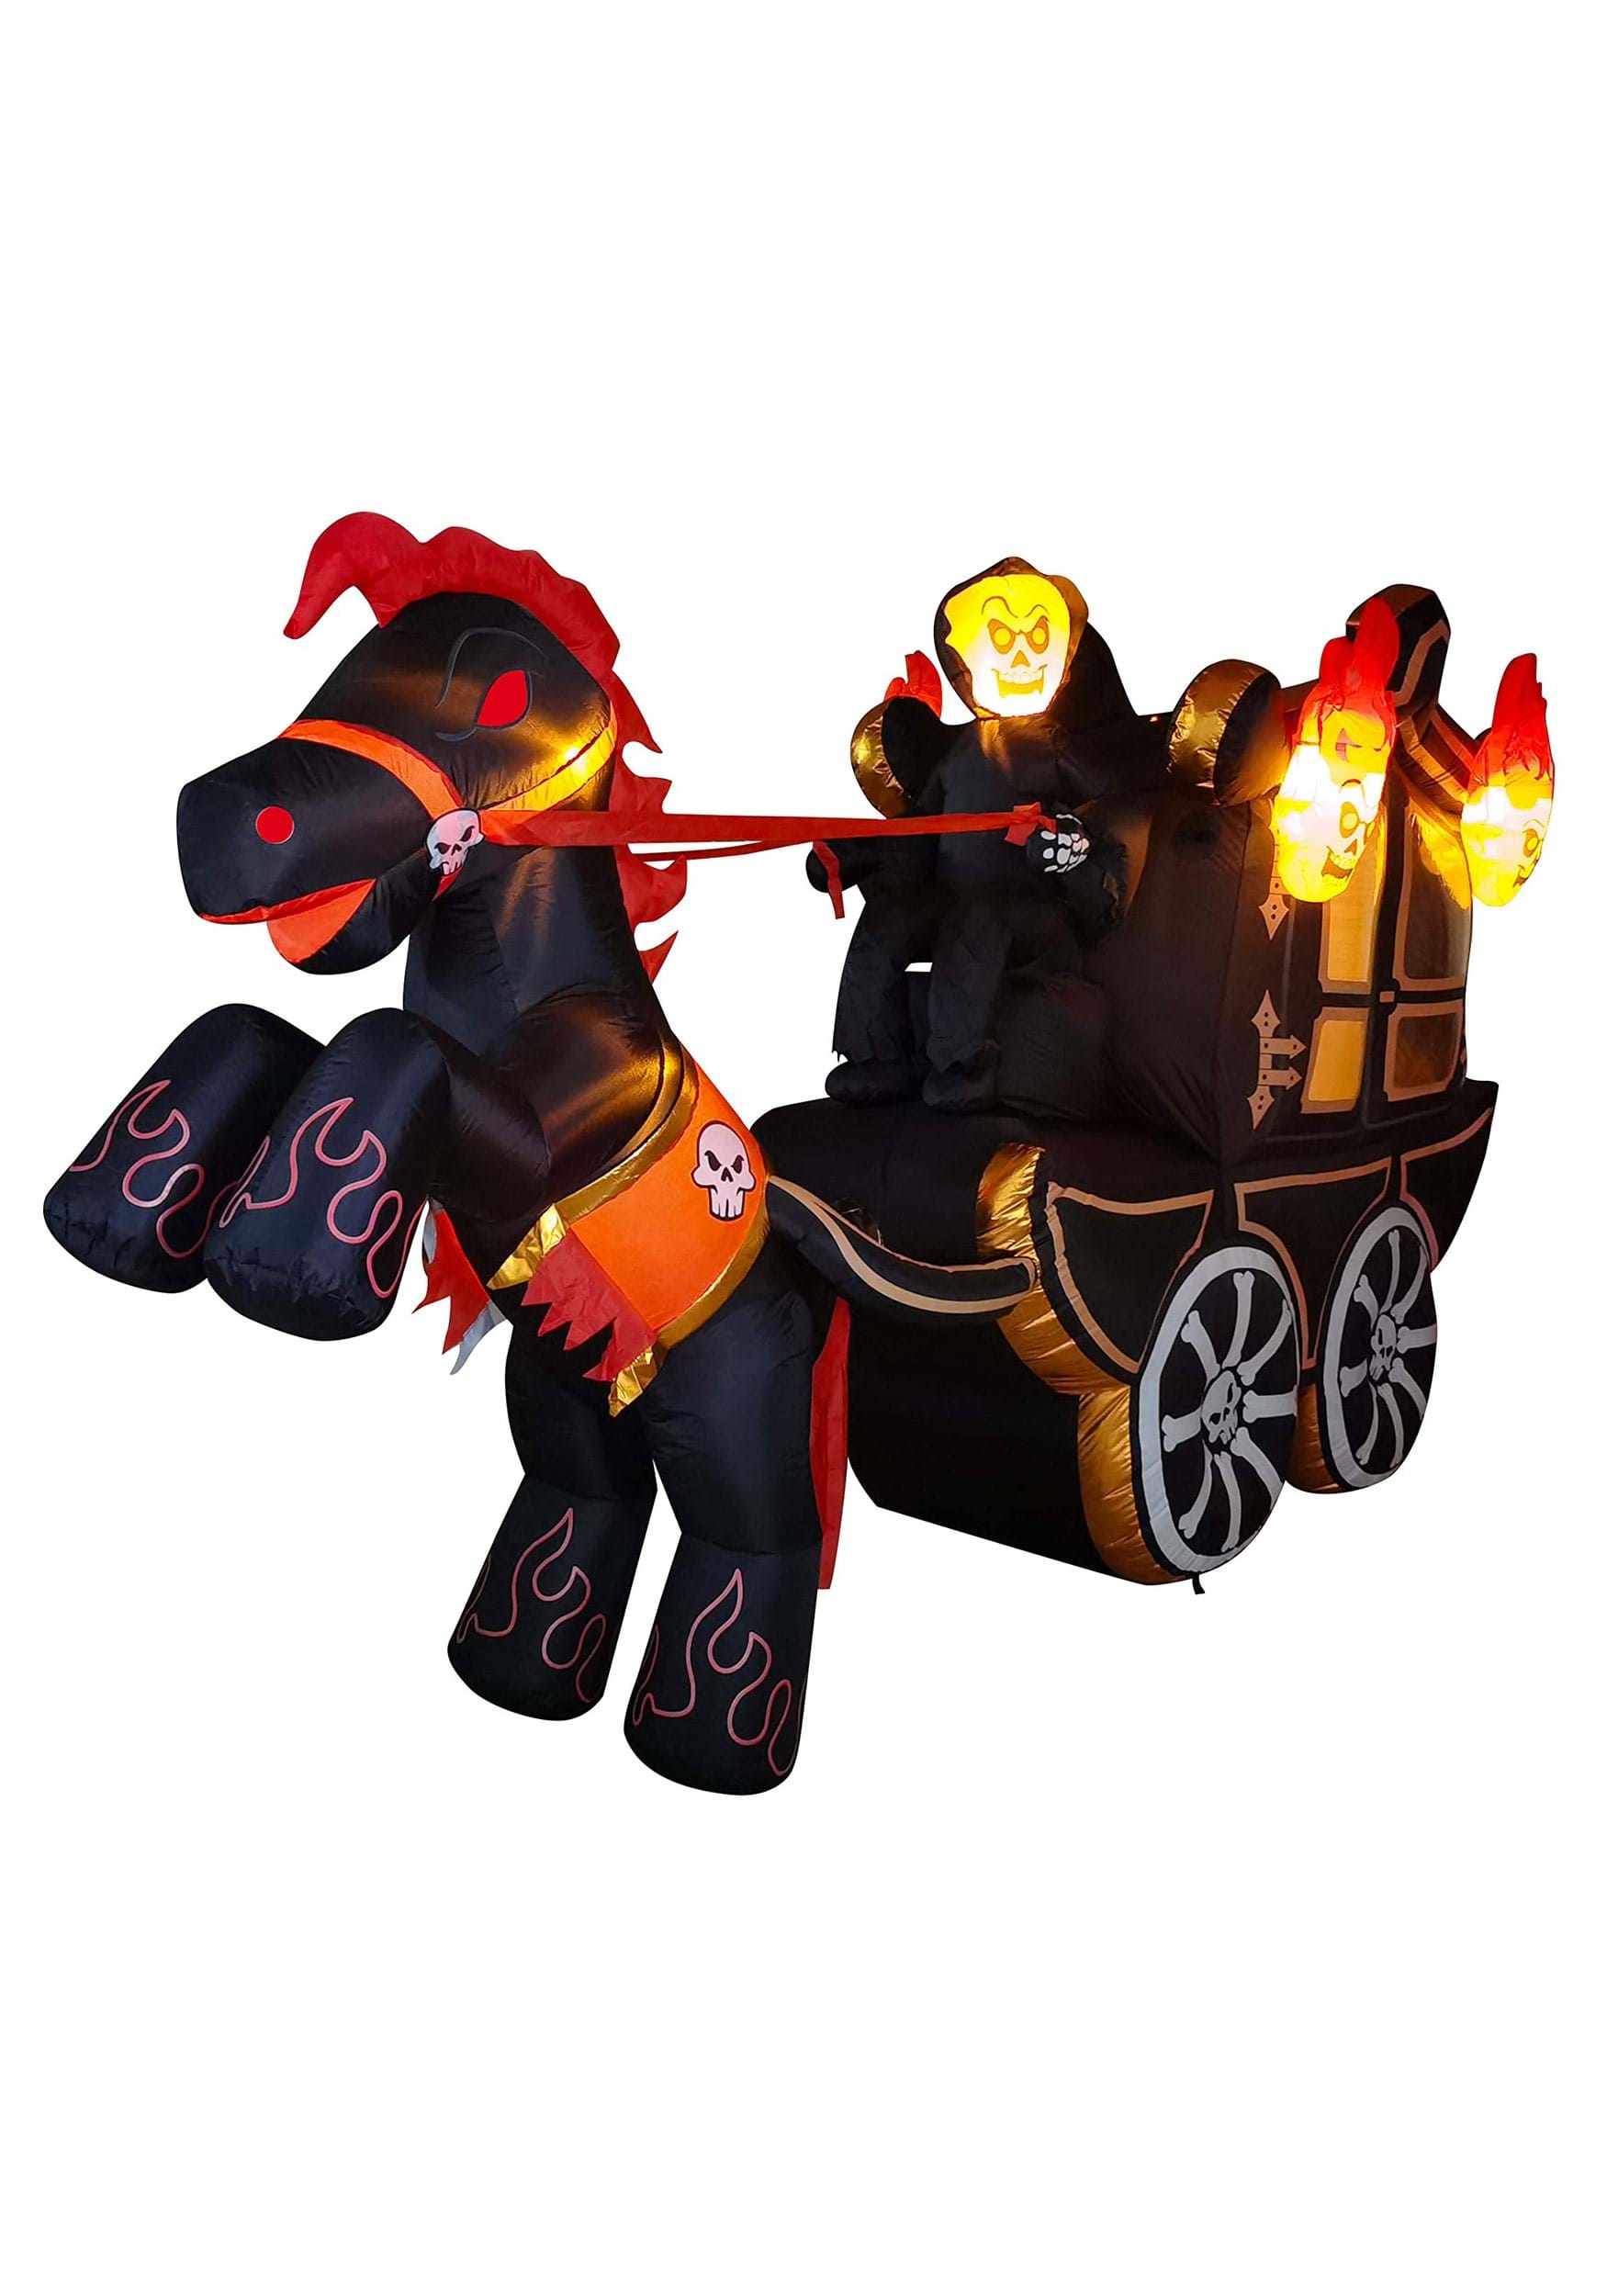 12 Foot Inflatable Halloween Carriage Decoration